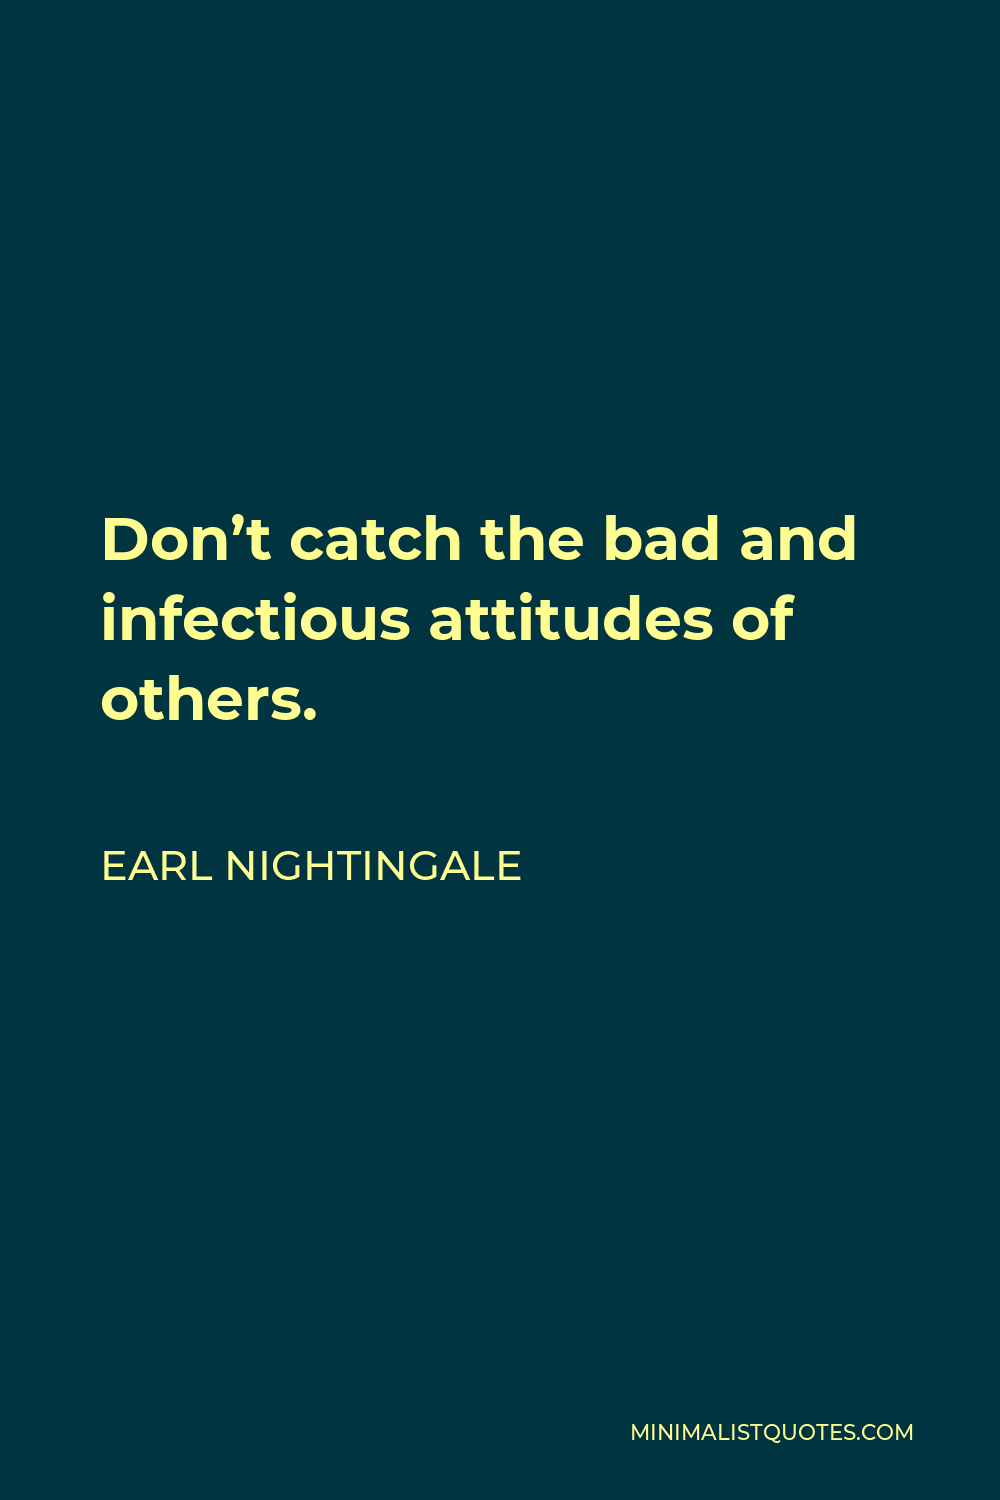 Earl Nightingale Quote - Don’t catch the bad and infectious attitudes of others.